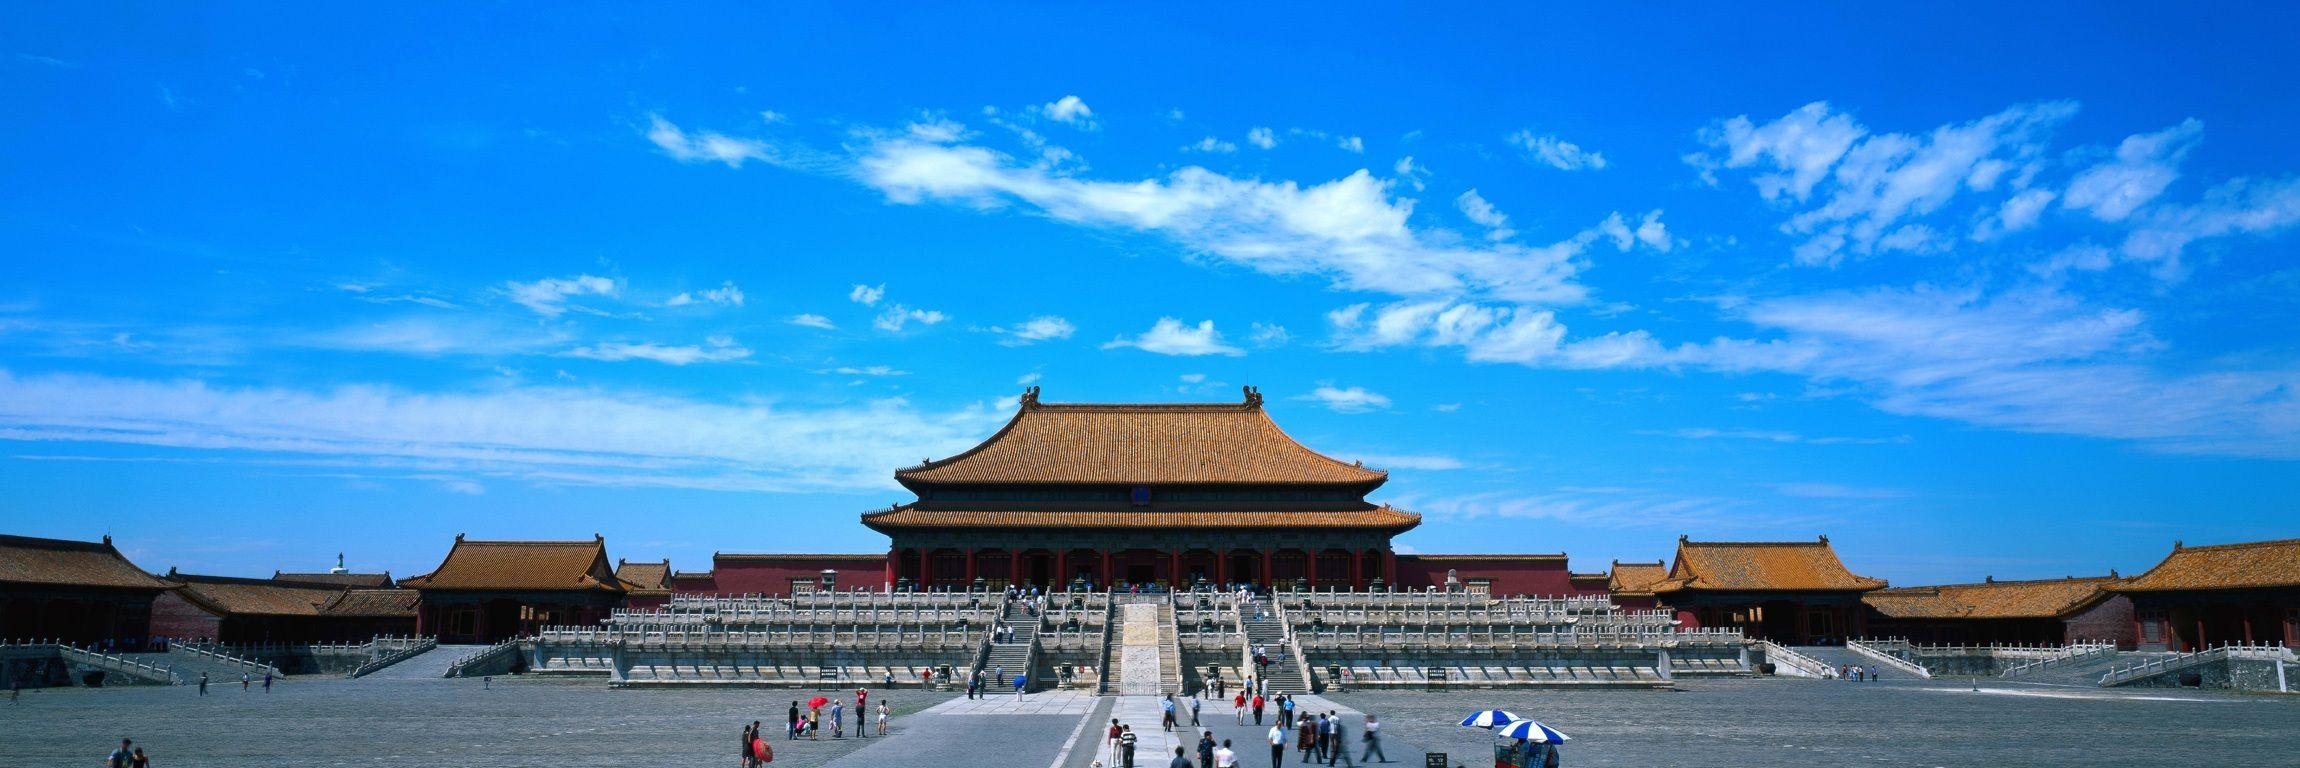 image of Wallpaper Beijing Imperial Palace - #SC